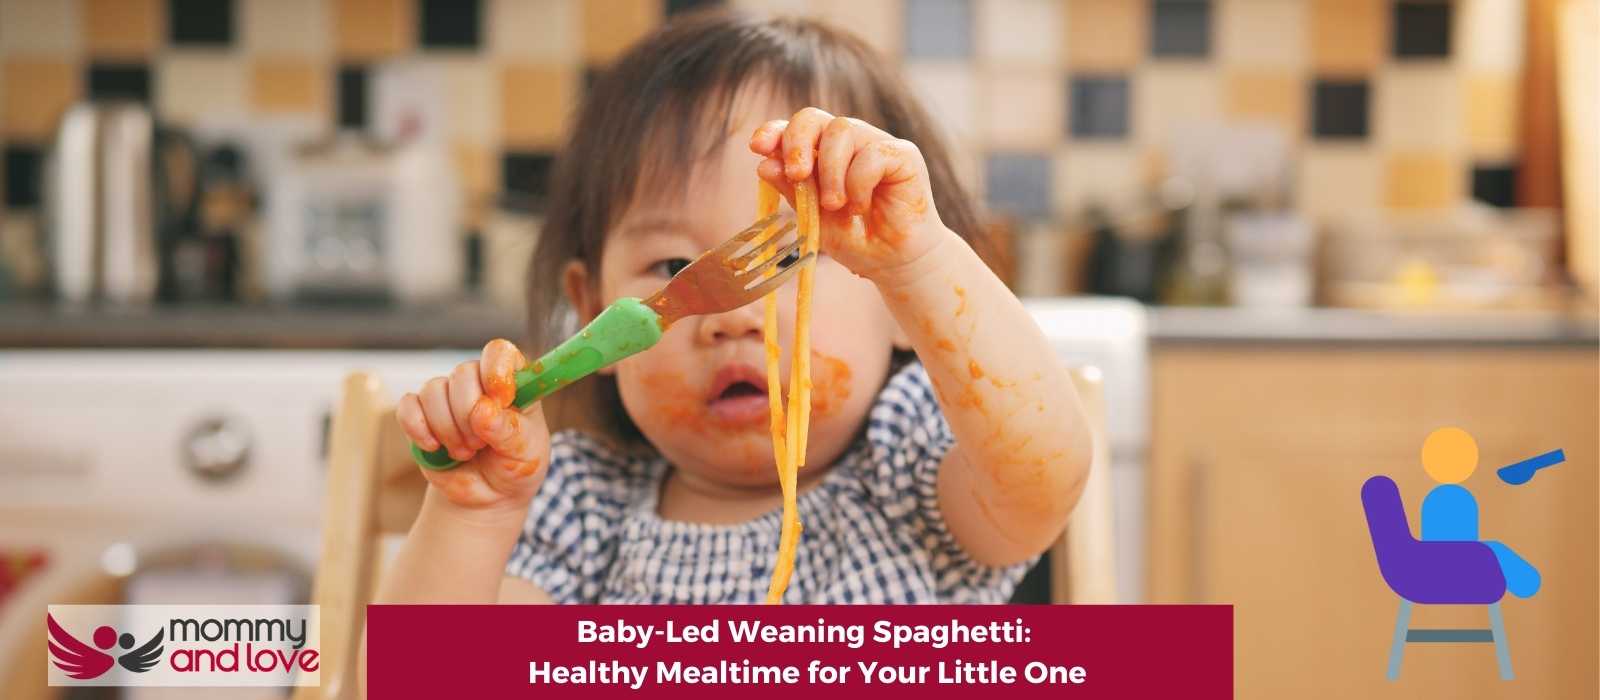 Baby-Led Weaning Spaghetti Healthy Mealtime for Your Little One